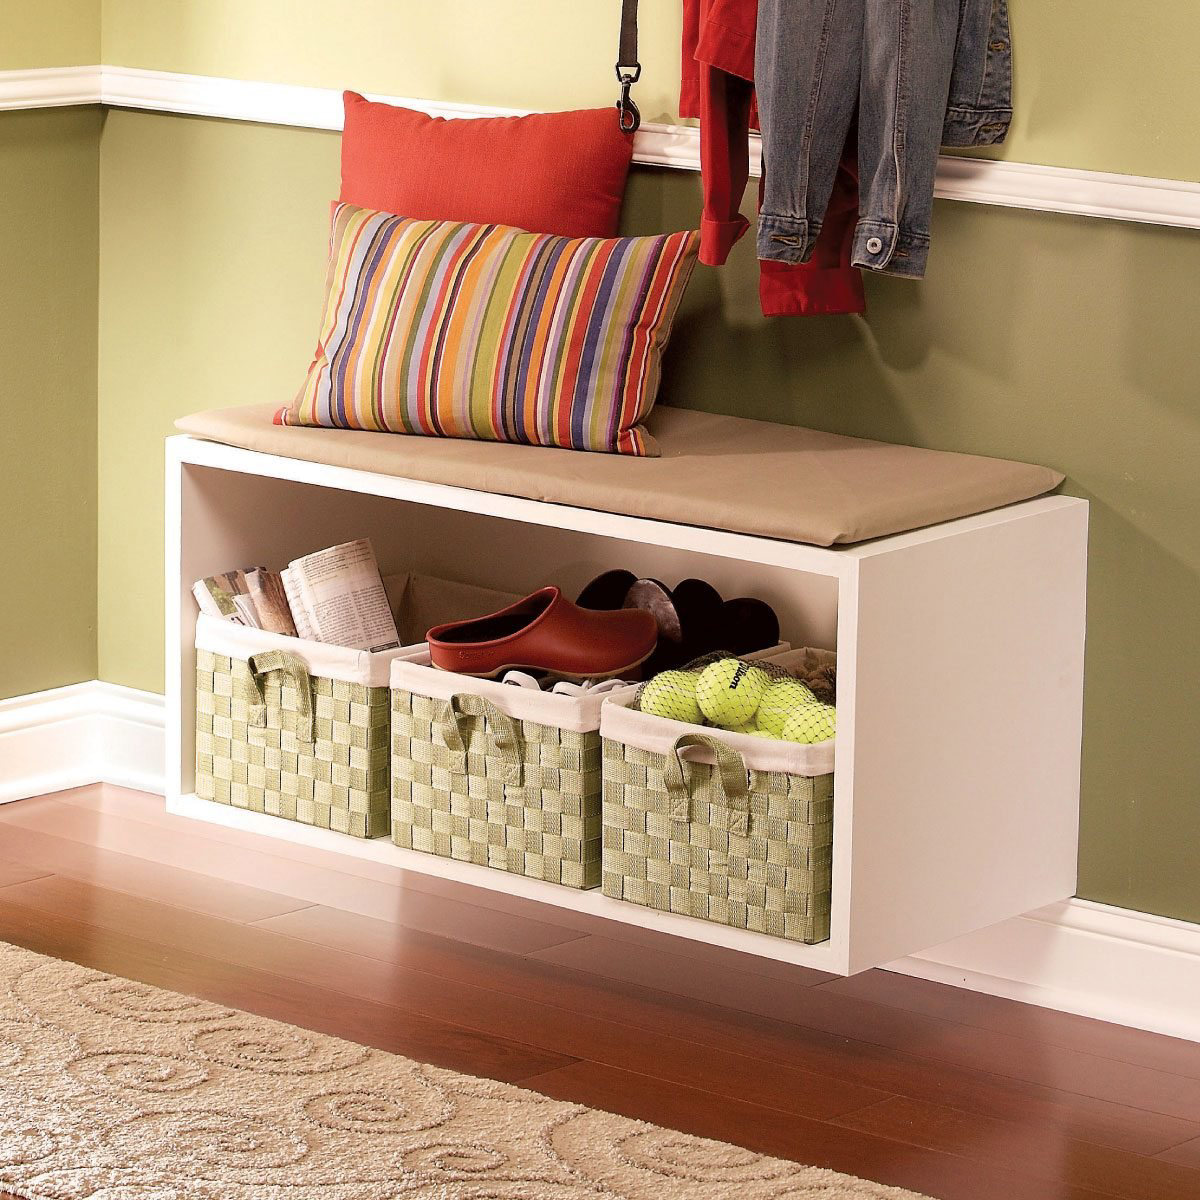 How To Build Simple Box Shelves for Your Entryway